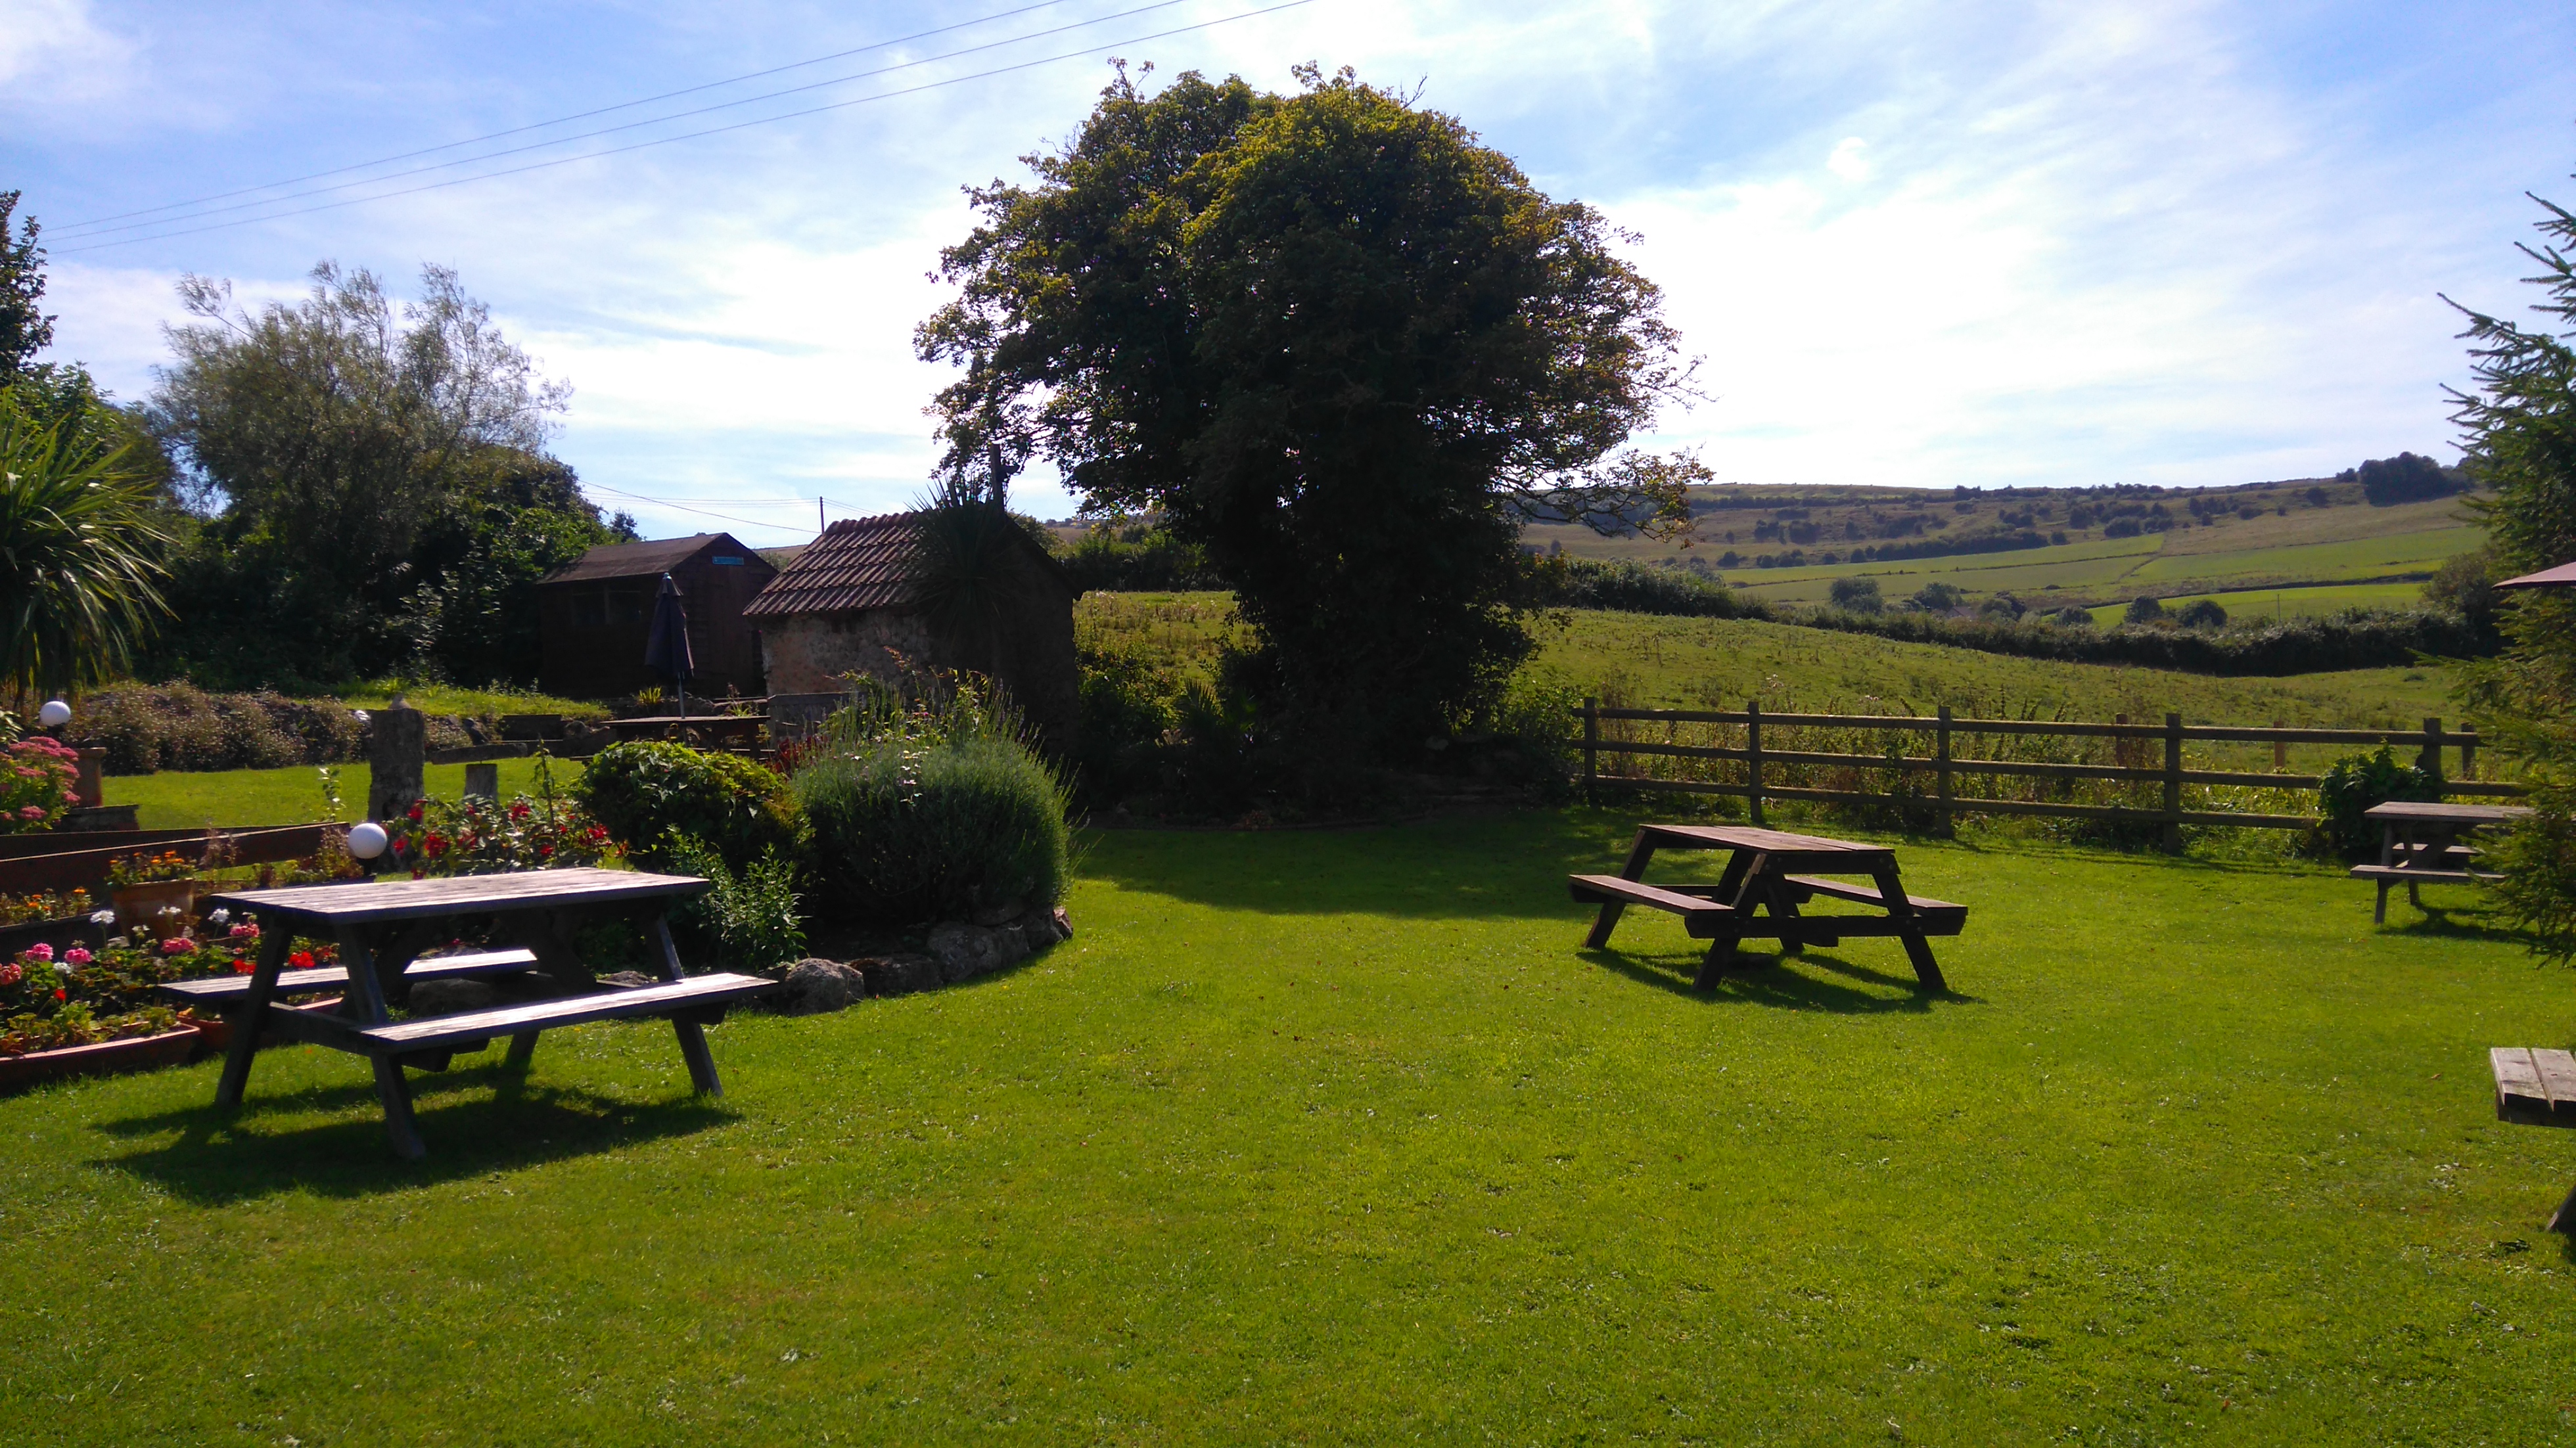 A pub garden in a rural setting on a sunny day. Benches are present within the garden, and fields stretch off into the distance.